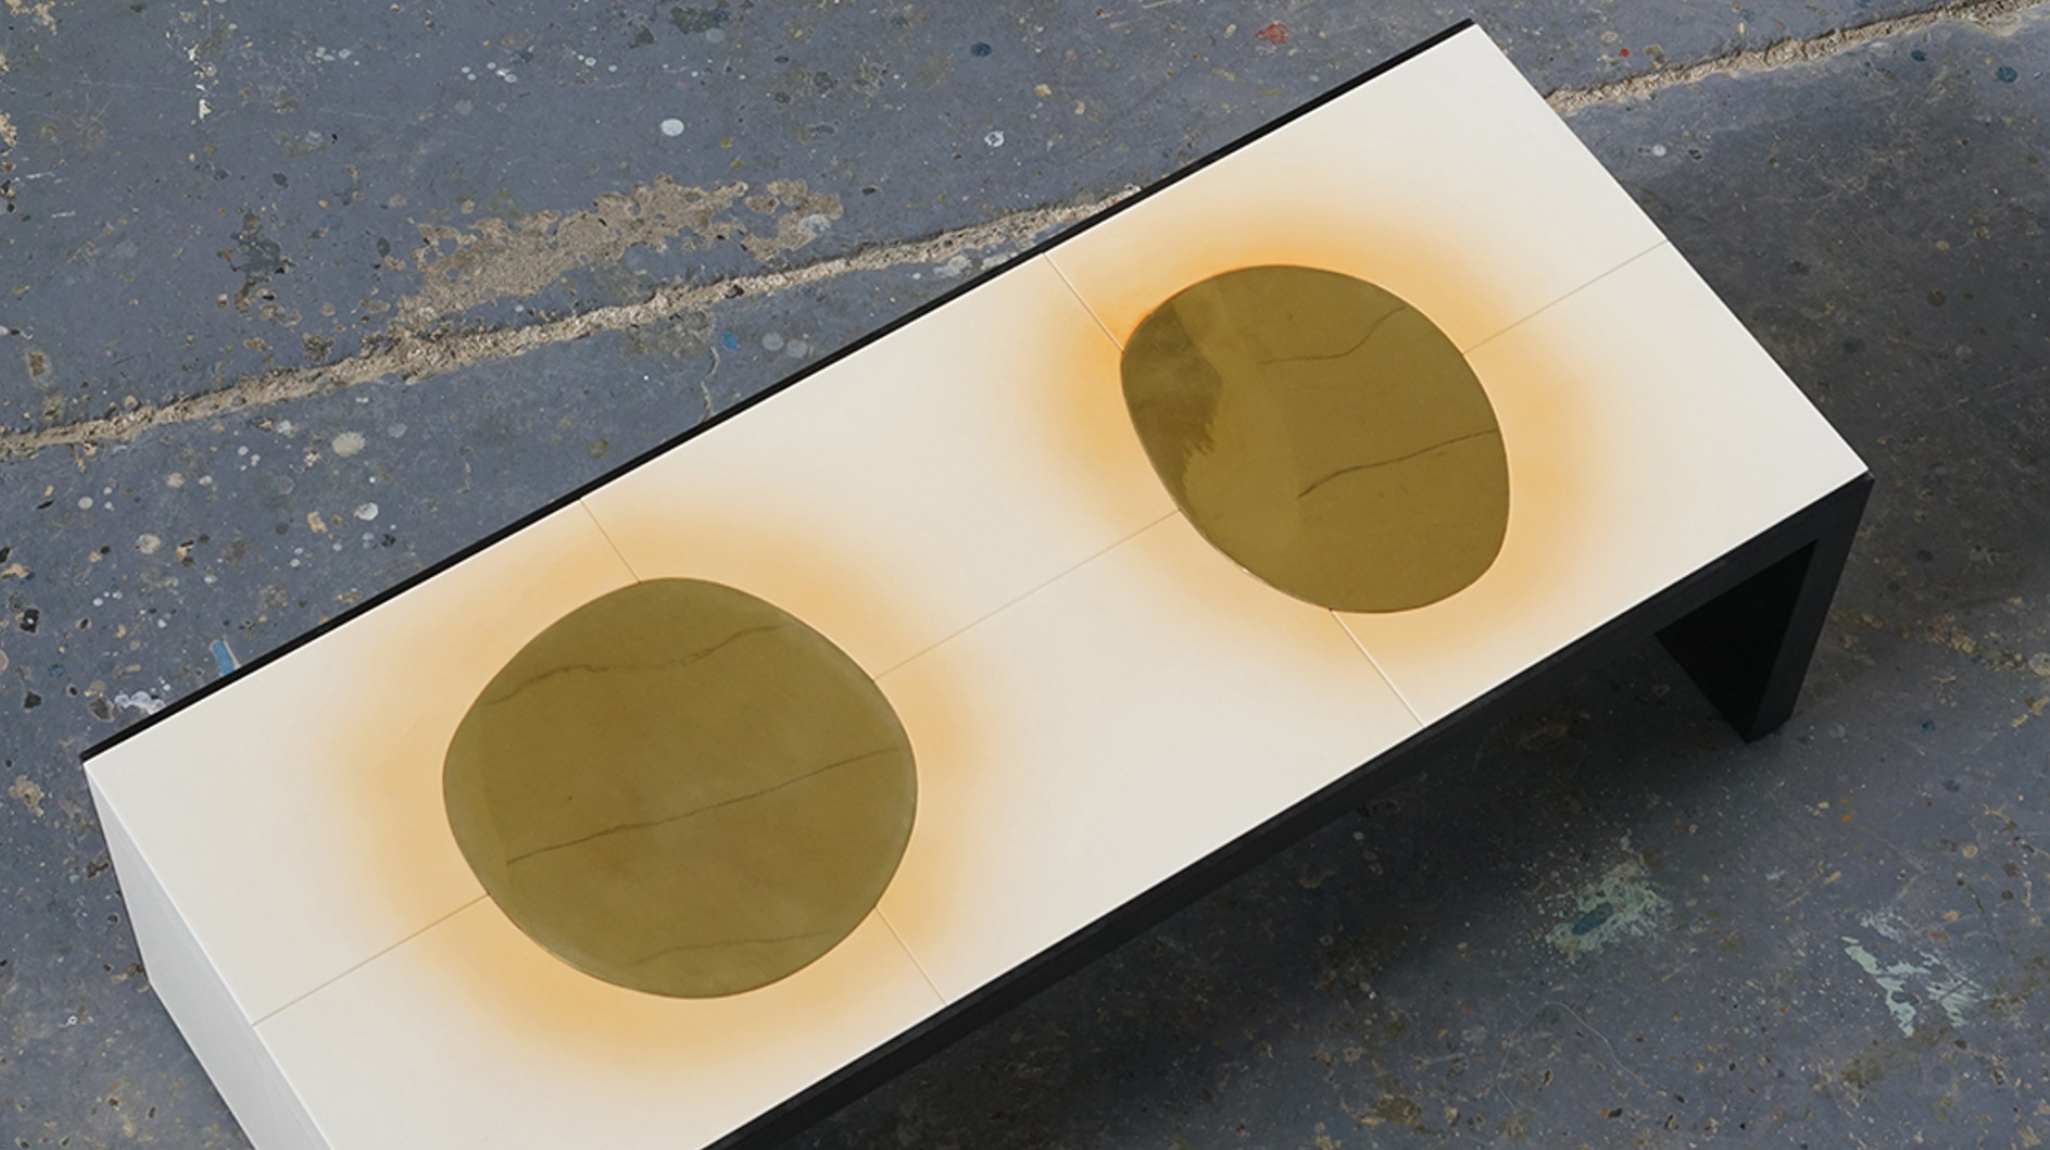 Image of a handmade table by New York-based Roman Thomas, featuring gold brass accents on a white surface